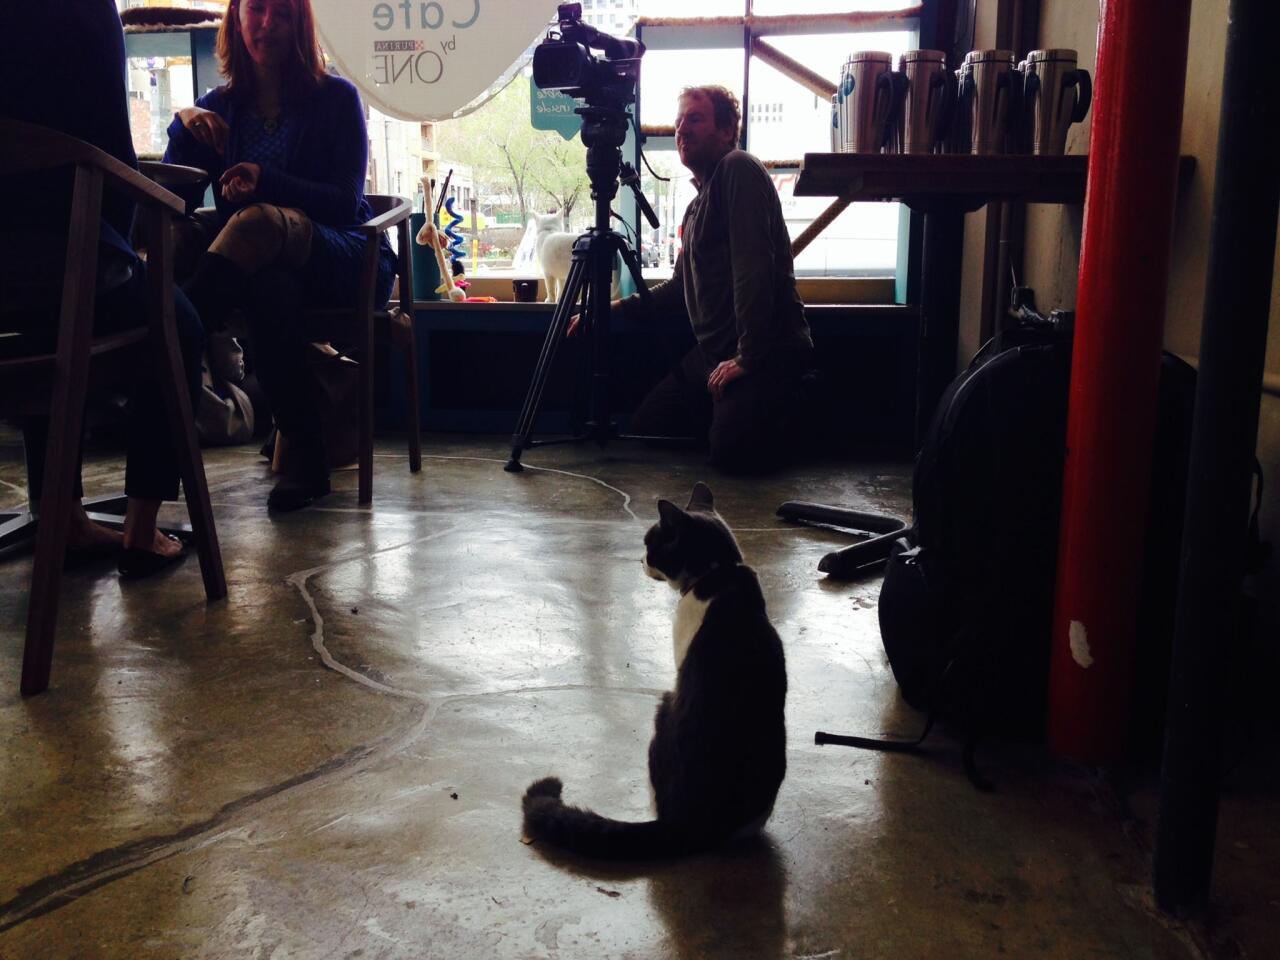 NYC cat cafe